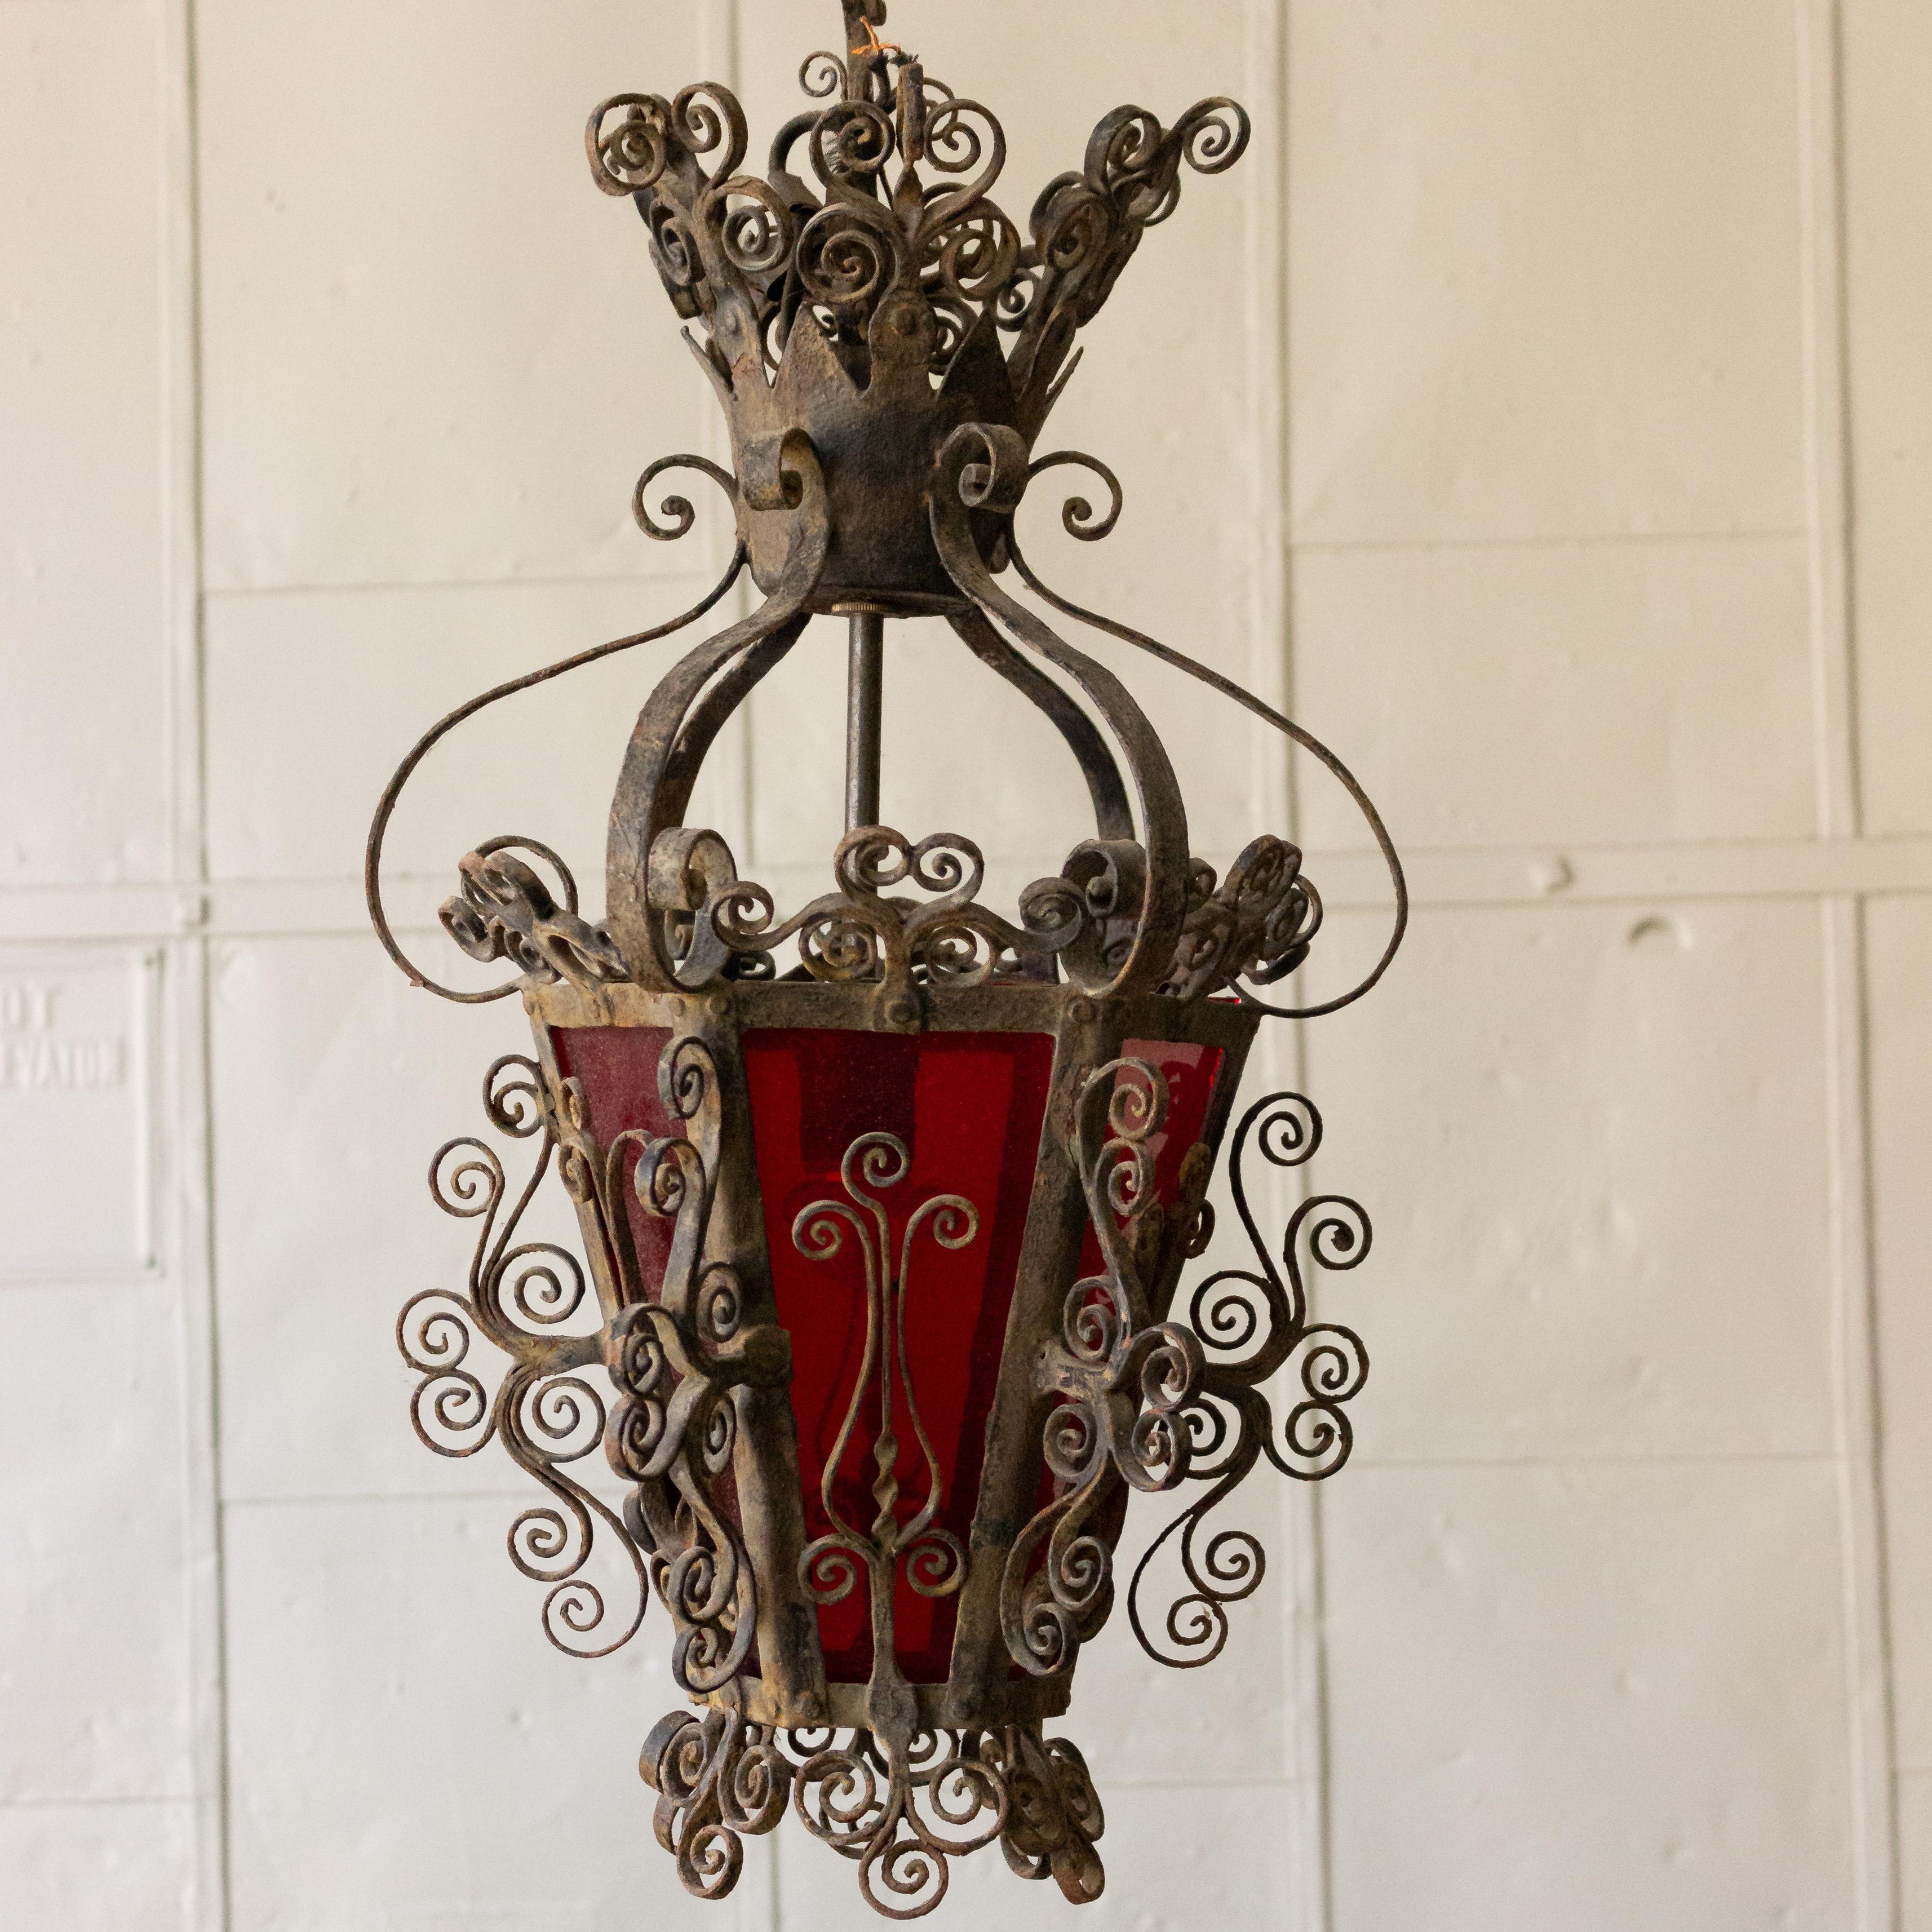 Highly decorated and scrolled iron lantern with red glass panes. The original black paint finish is distressed but still very much visible.